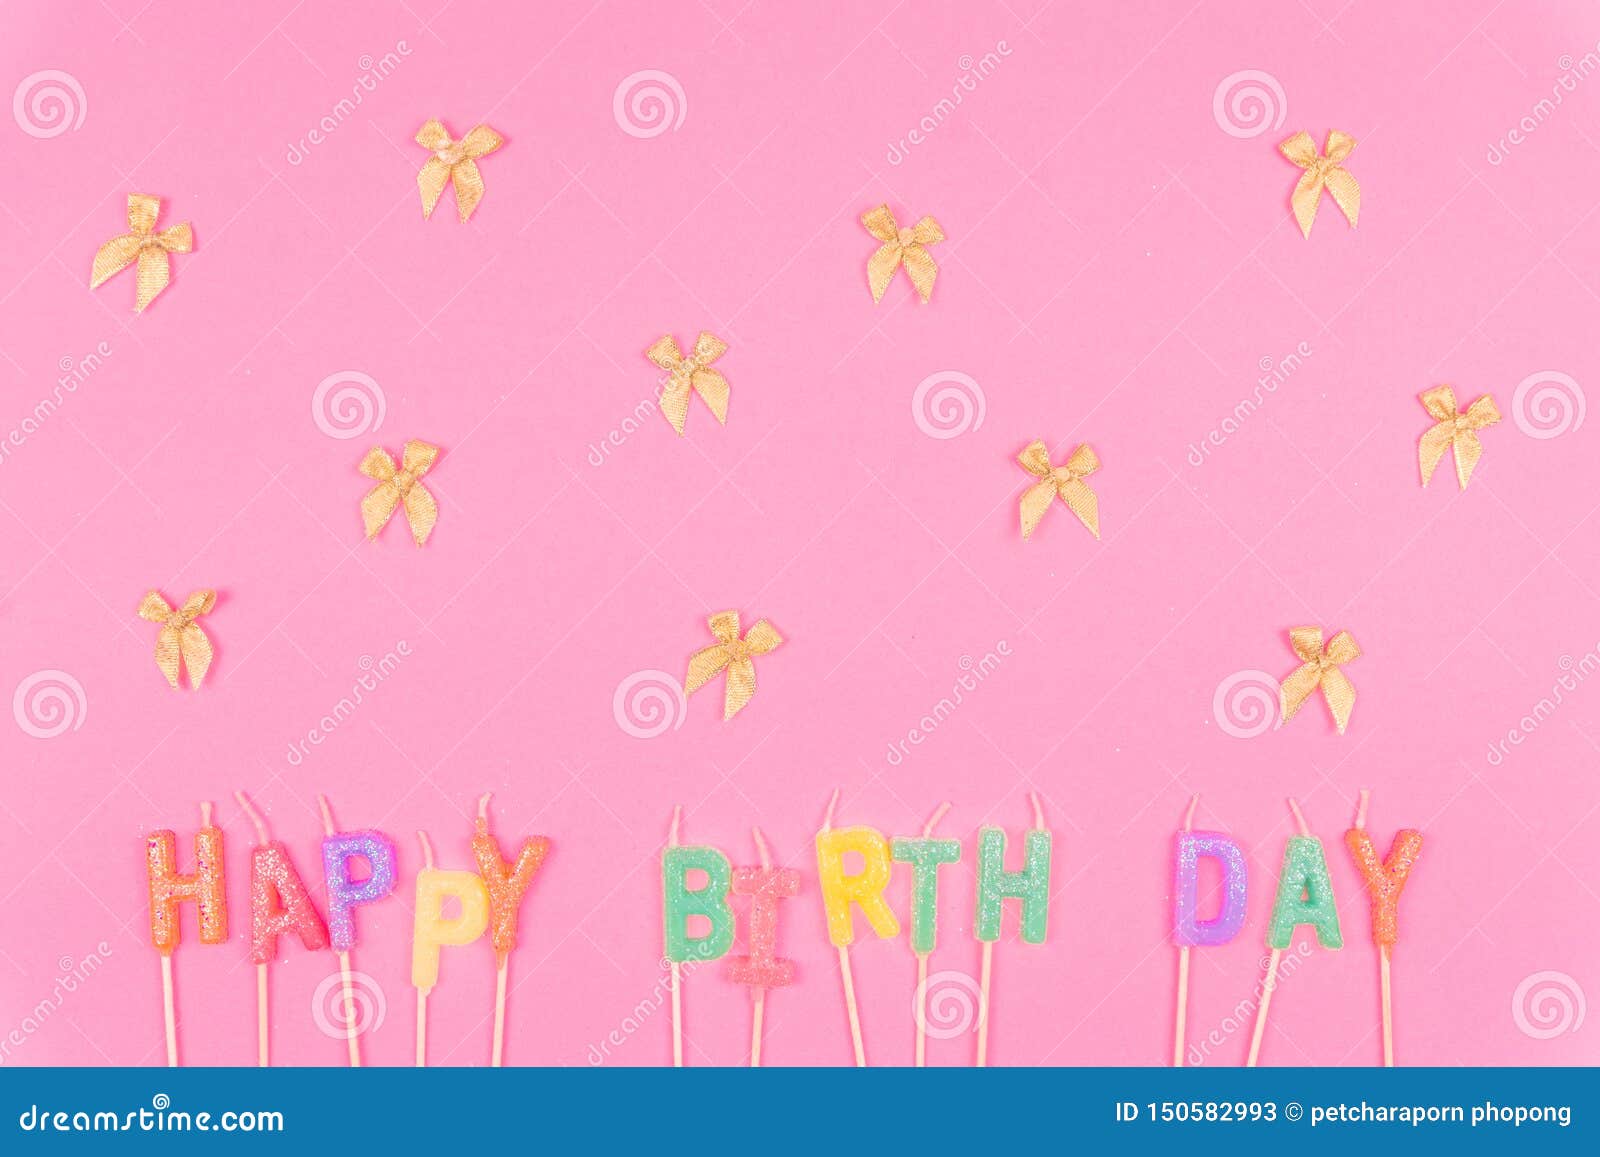 Colorful Happy Birthday on Pink Stock Image - Image of decorative ...